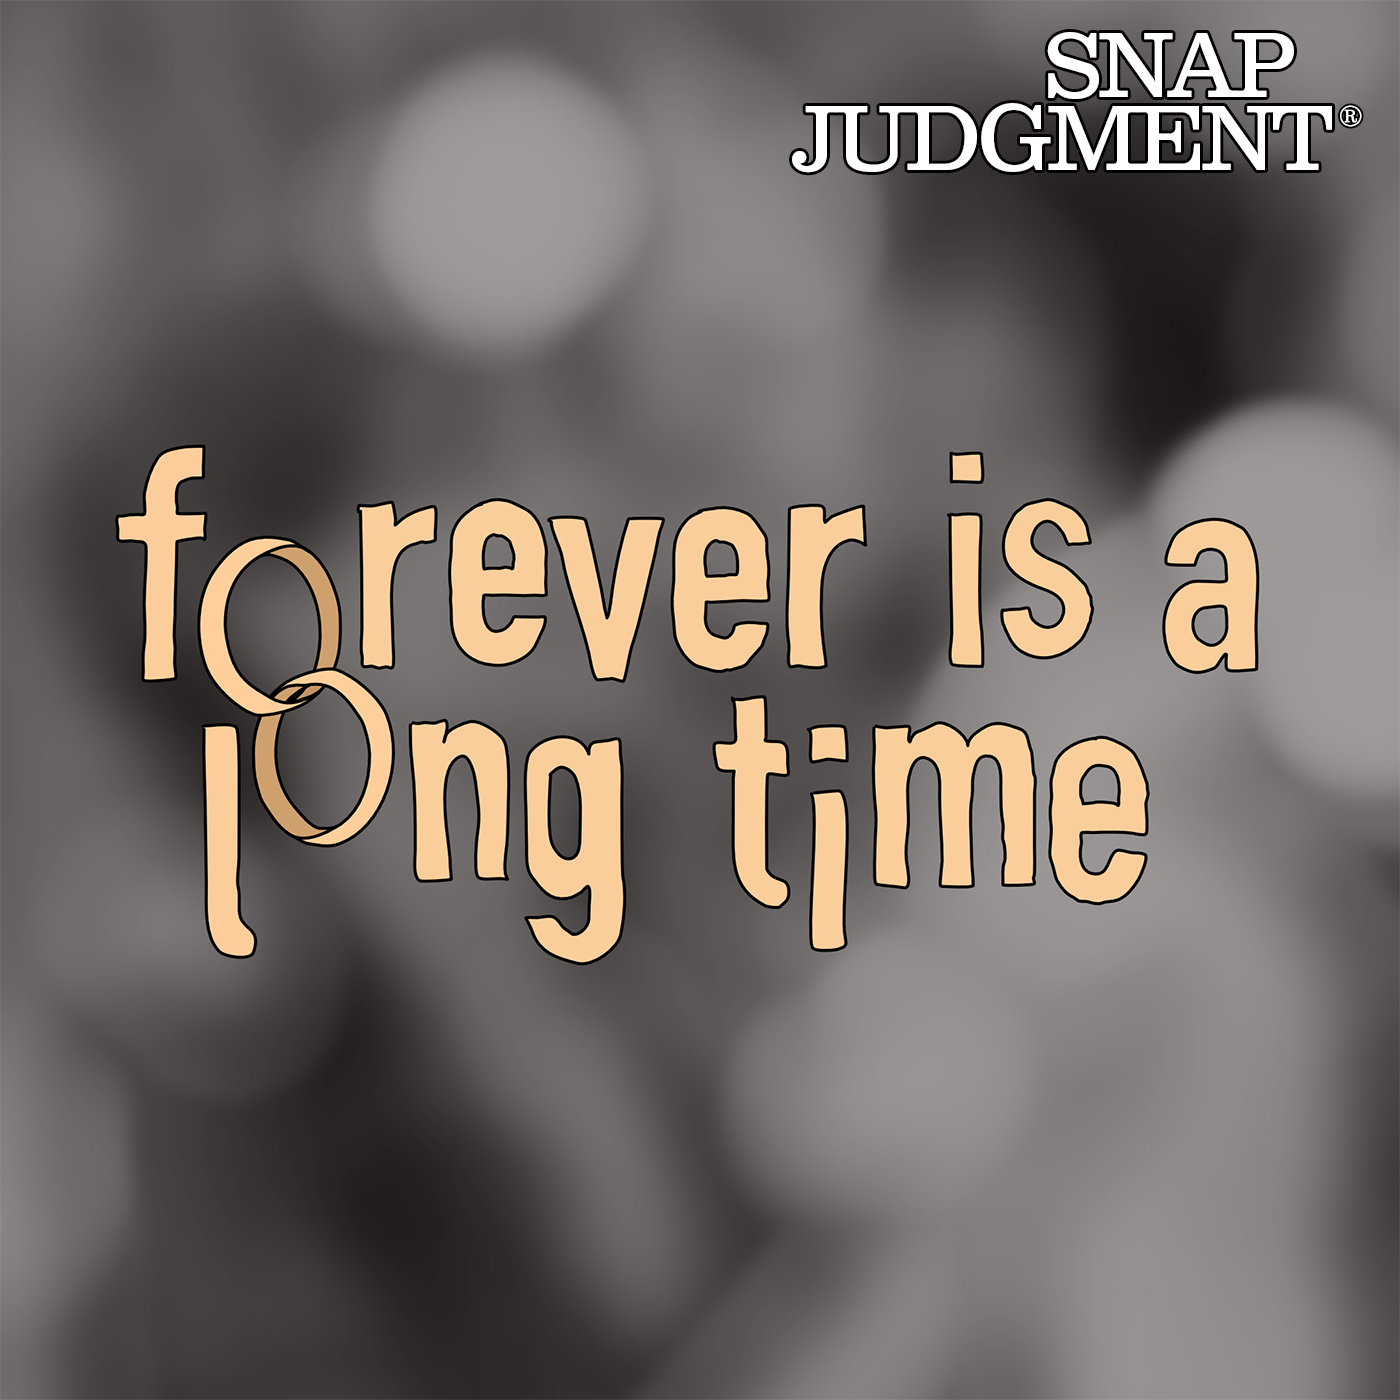 Thumbnail for "Forever is a Long Time".